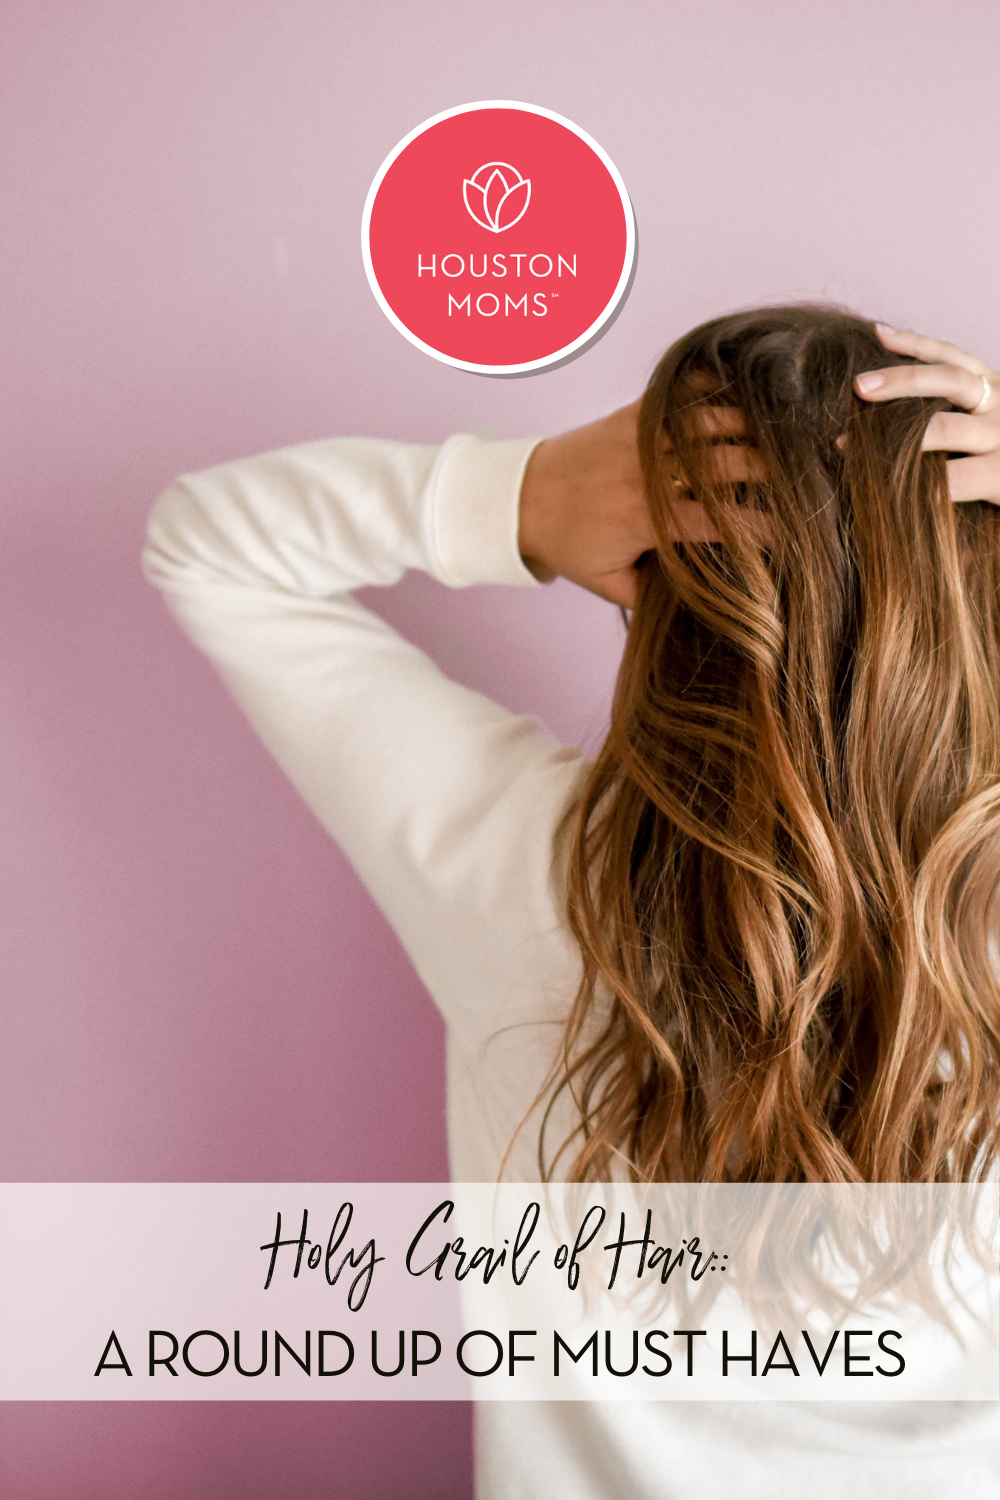 Holy Grail of Hair: A Round Up of Must Haves. A photograph of a woman from behind of her putting her hands through her hair. Logo: Houston moms. 